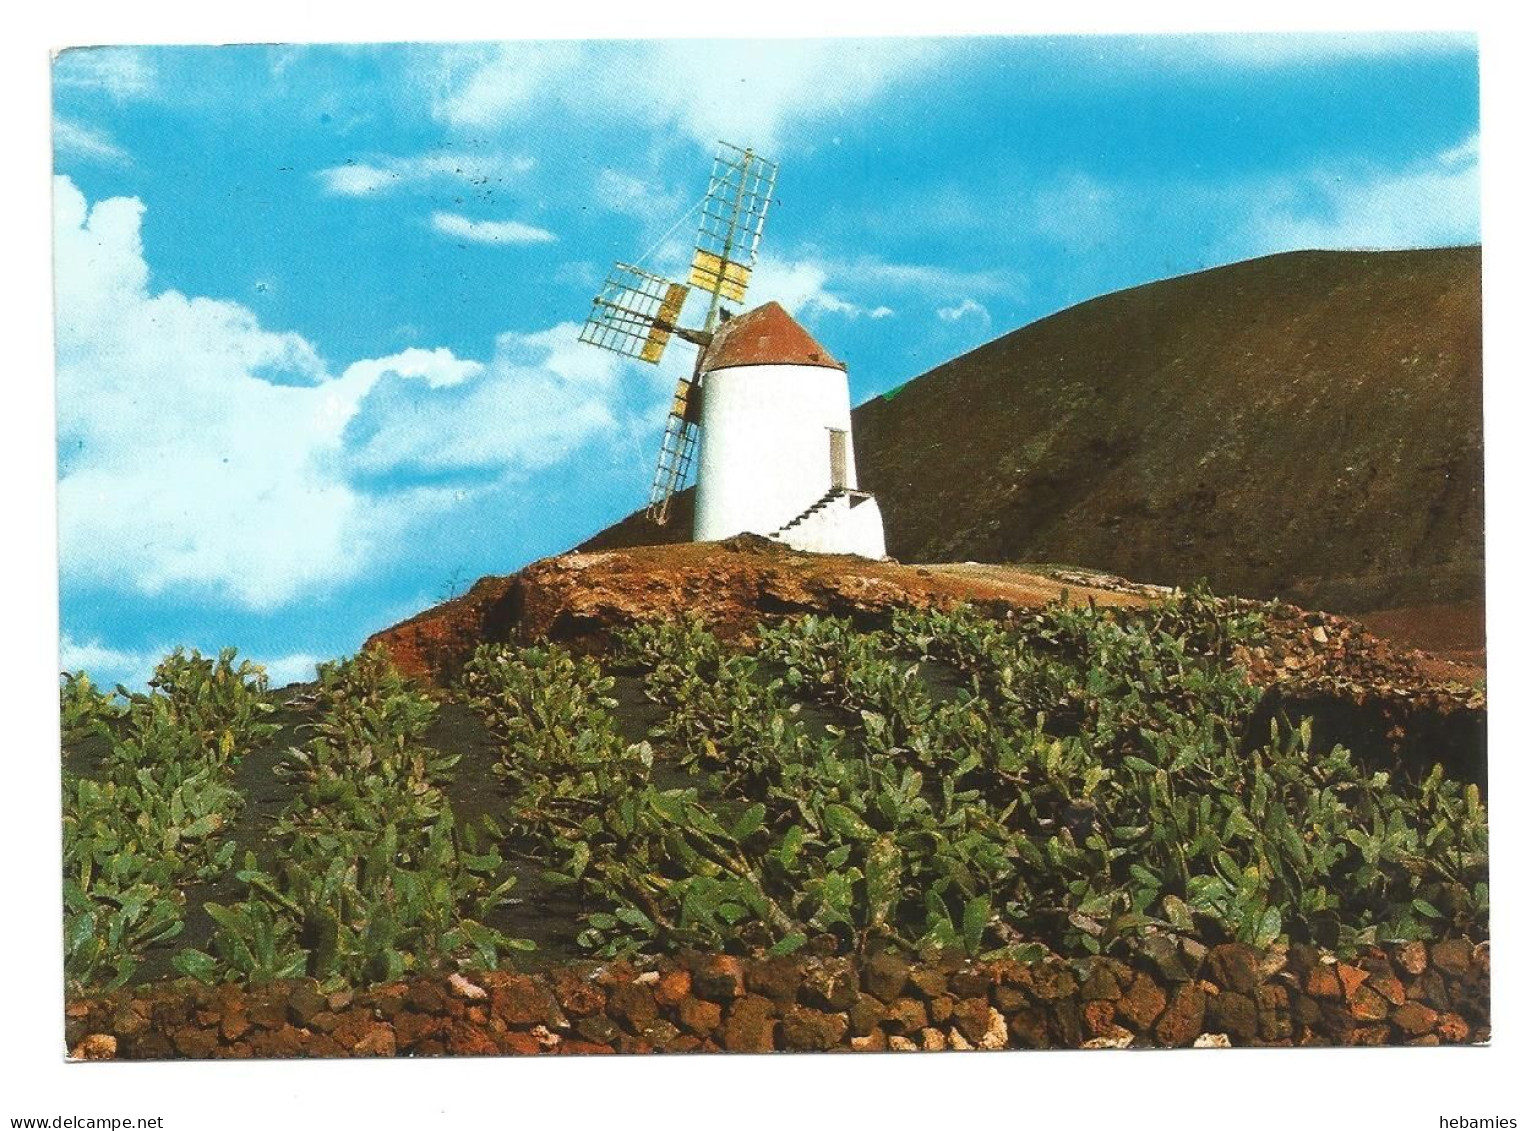 TYPICAL WINDMILL - LANZAROTE - CANARY ISLANDS -  SPAIN - - Moulins à Vent